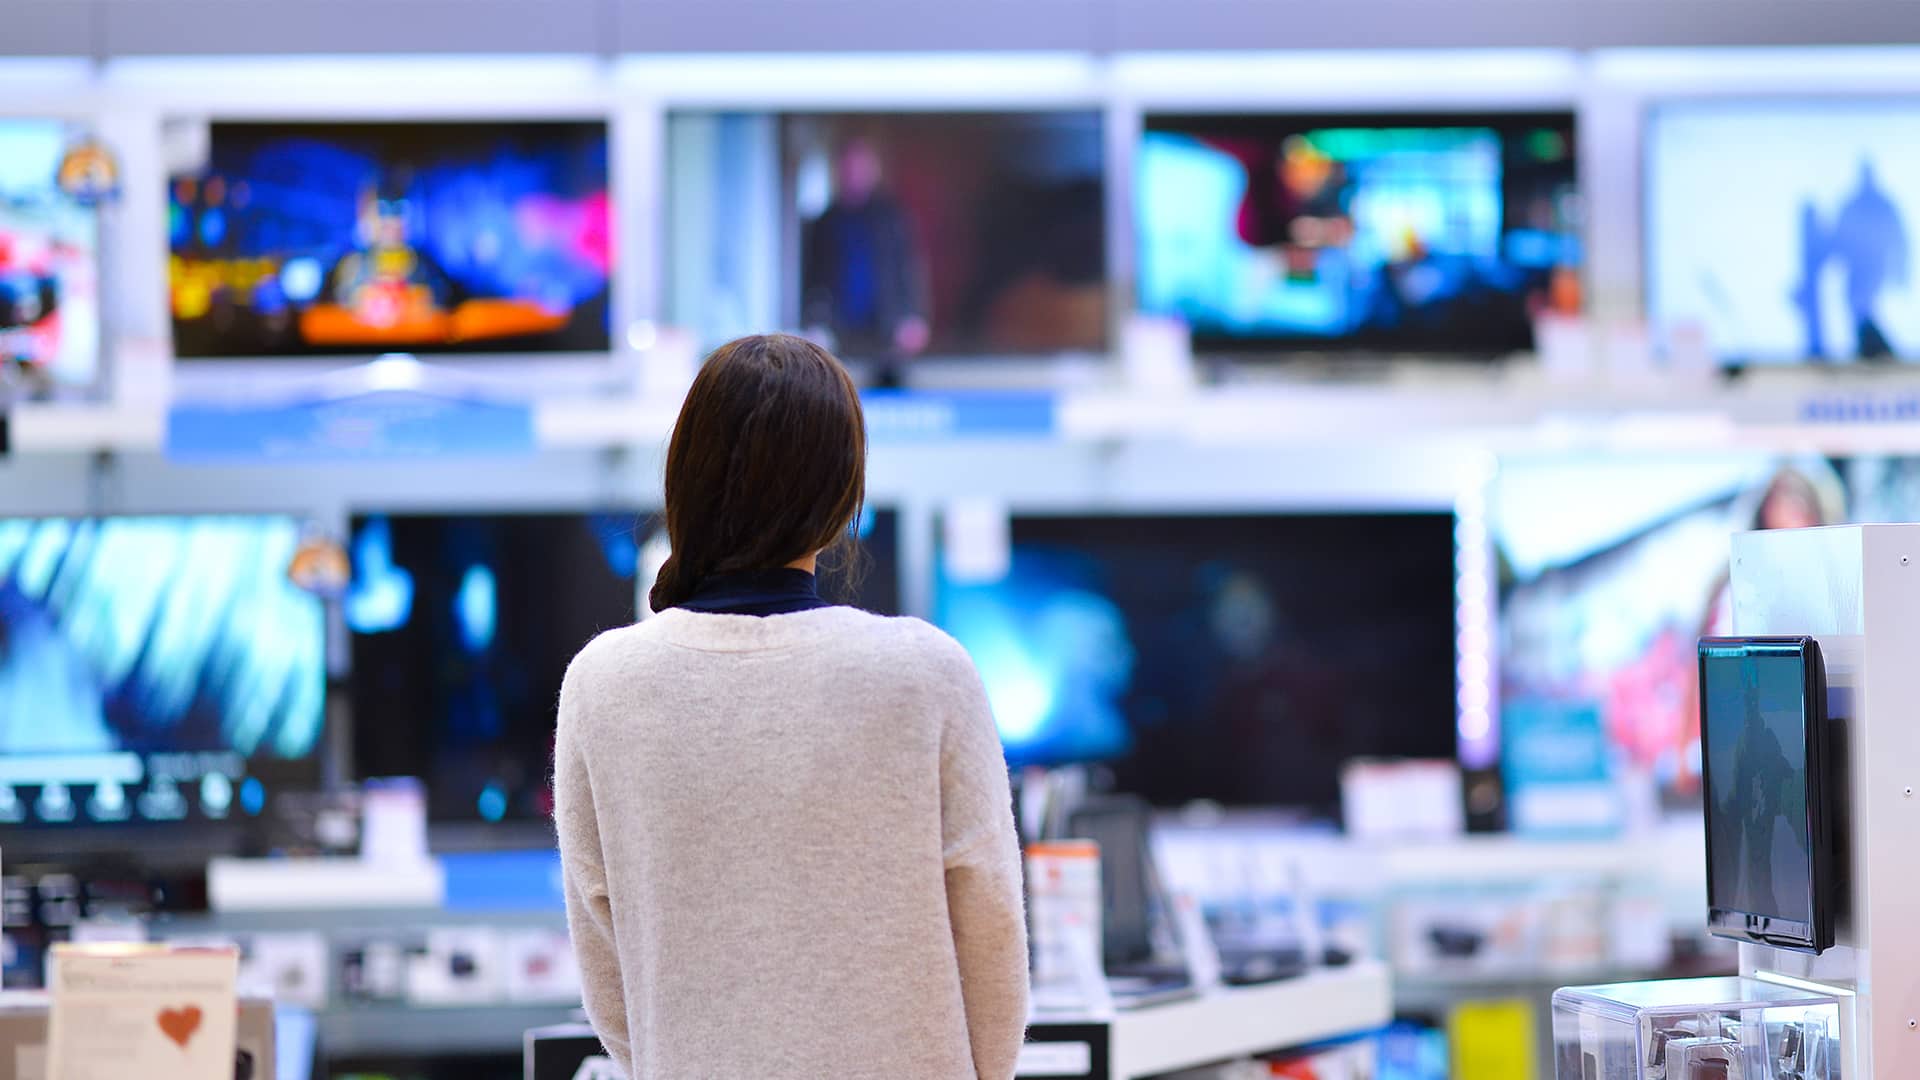 woman standing in front of wall of technology tvs shopping new 2020 hero